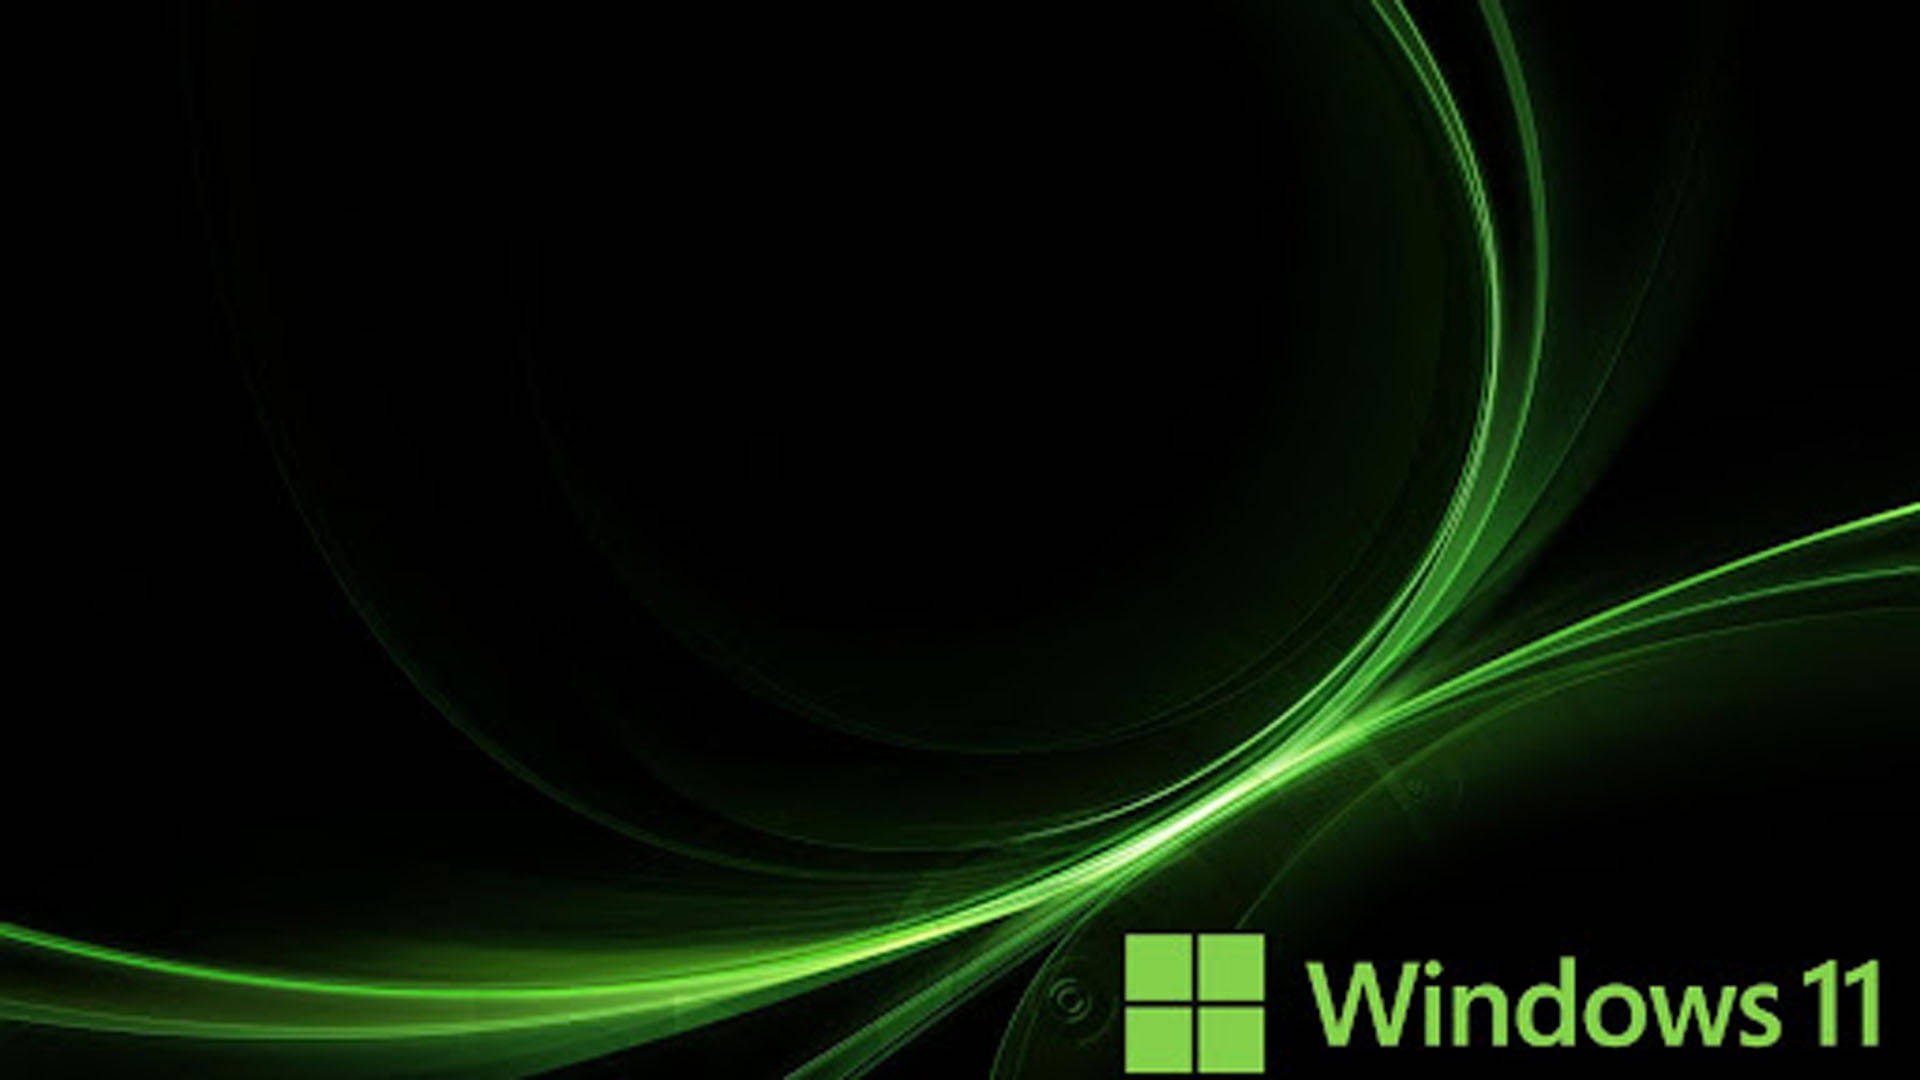 Black And Green Windows 11 Curves